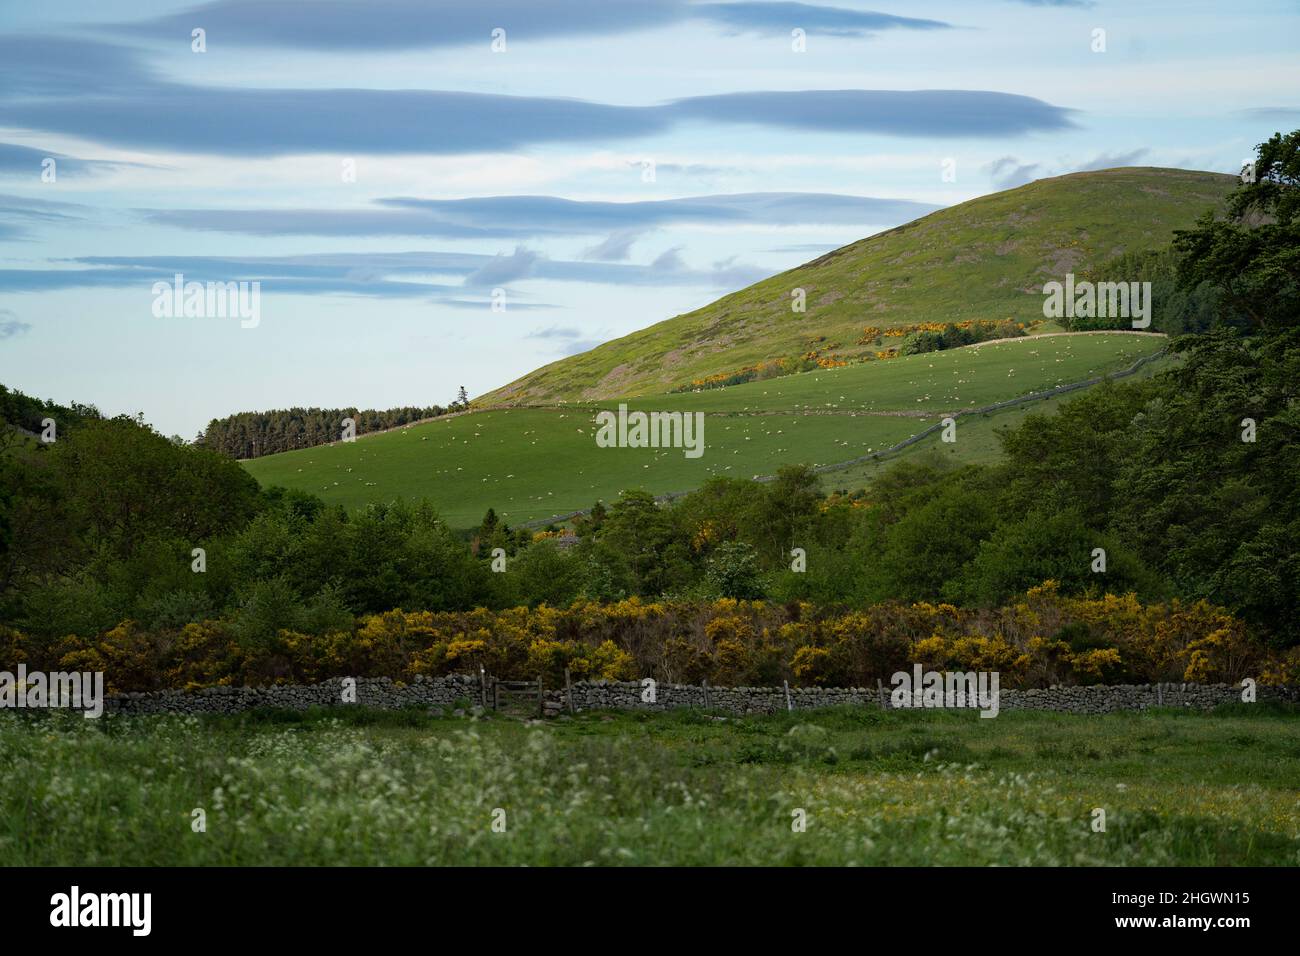 Hethpool, near Wooler, Northumberland - College Valley, Cheviot foothills. Stock Photo